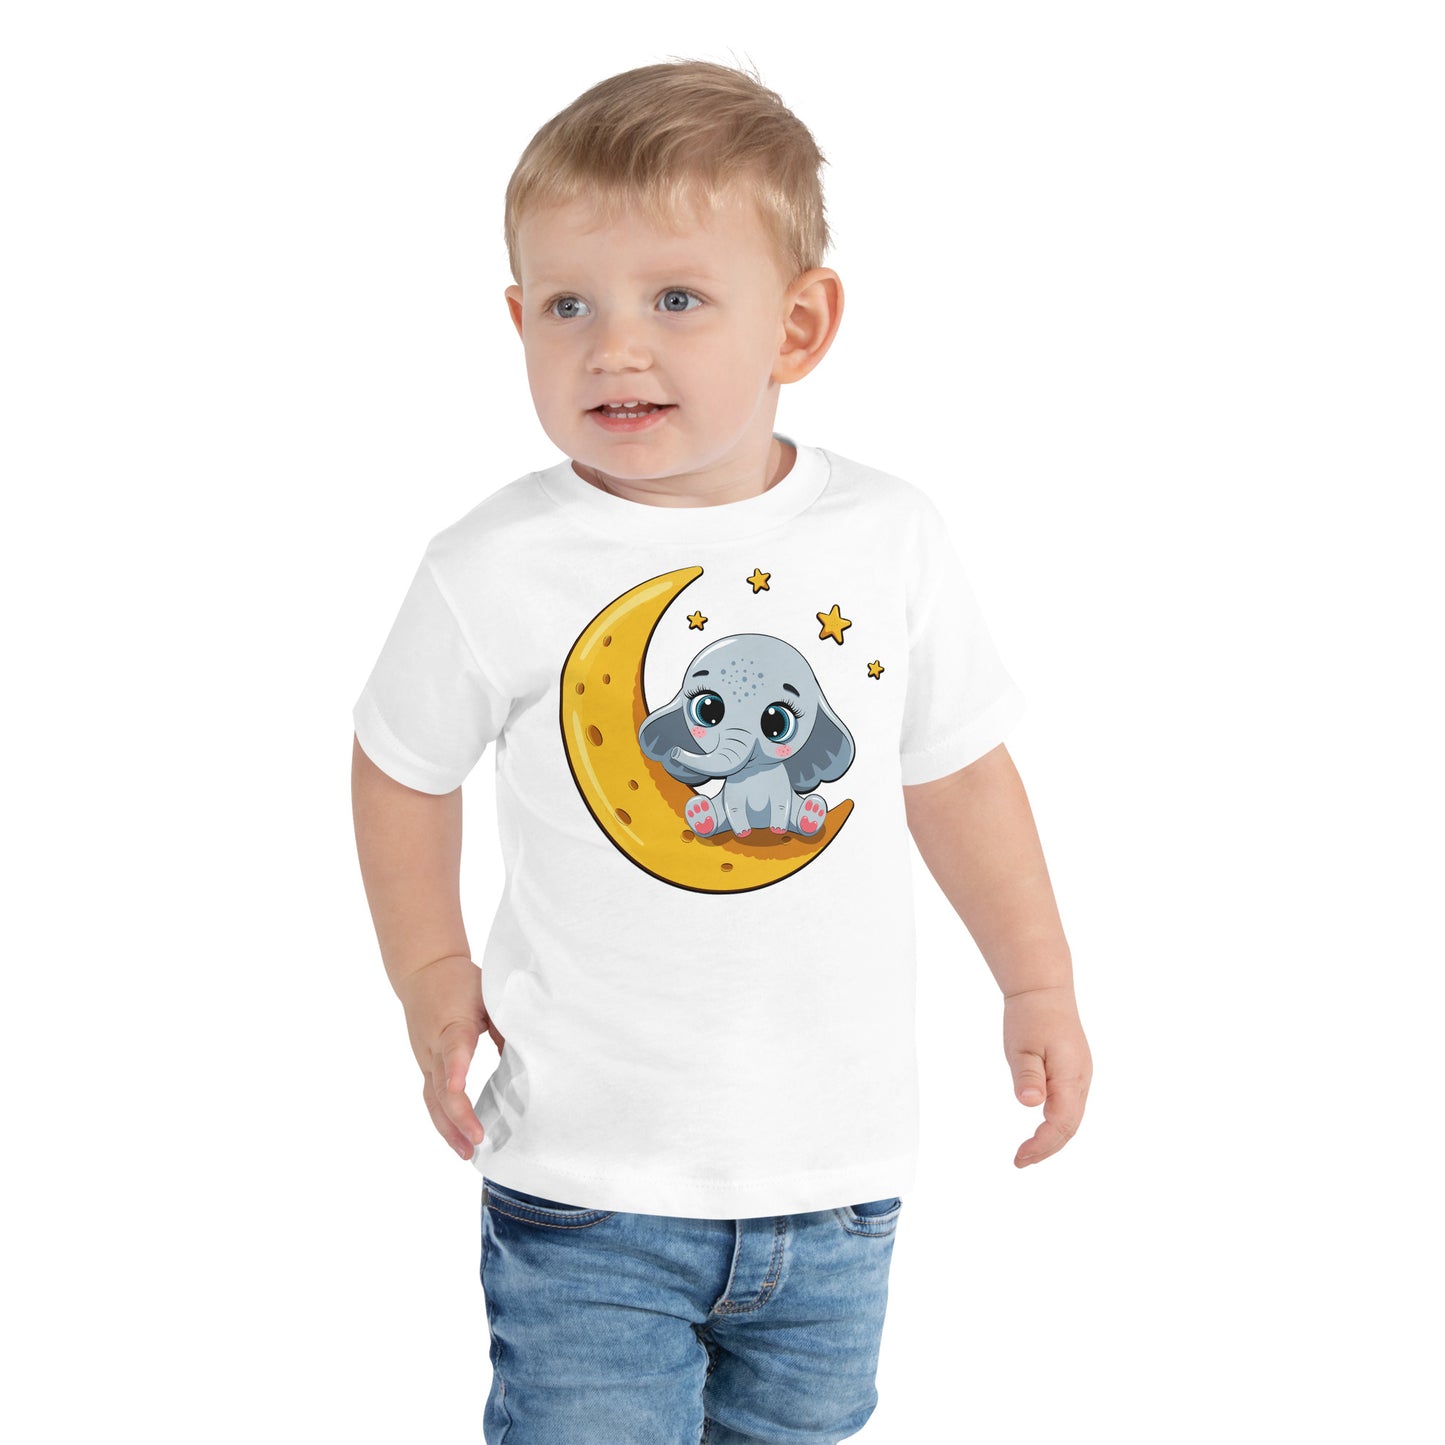 Cute Baby Elephant Sitting on the Moon T-shirt, No. 0085